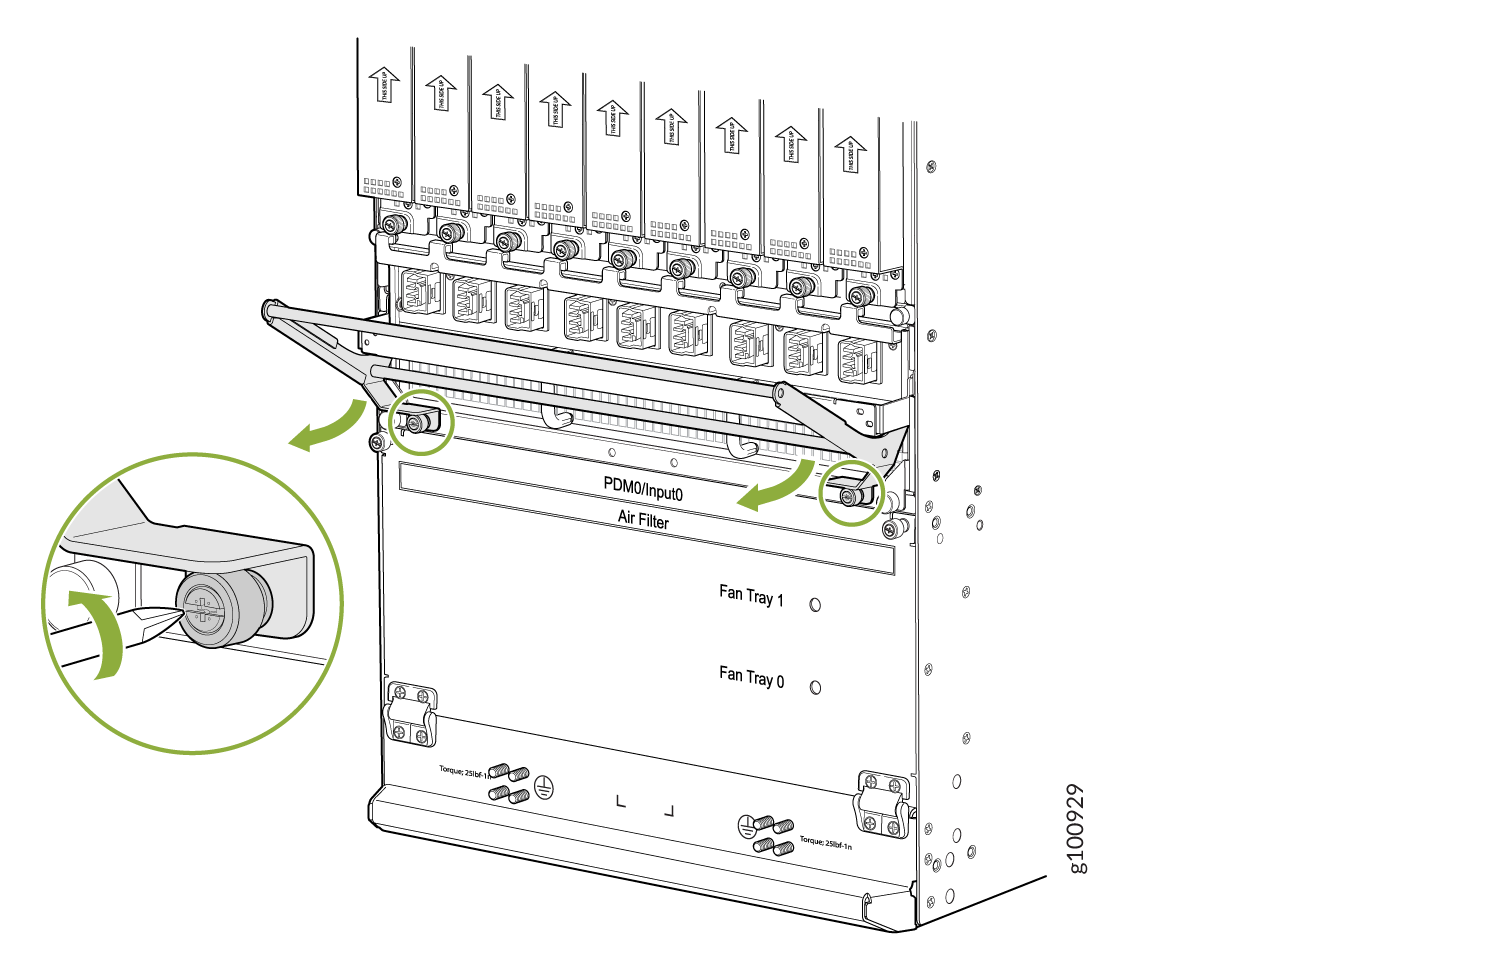 Removing the Extended Cable Manager for DC PDM (240 V China) and the Universal (HVAC/HVDC) PDM